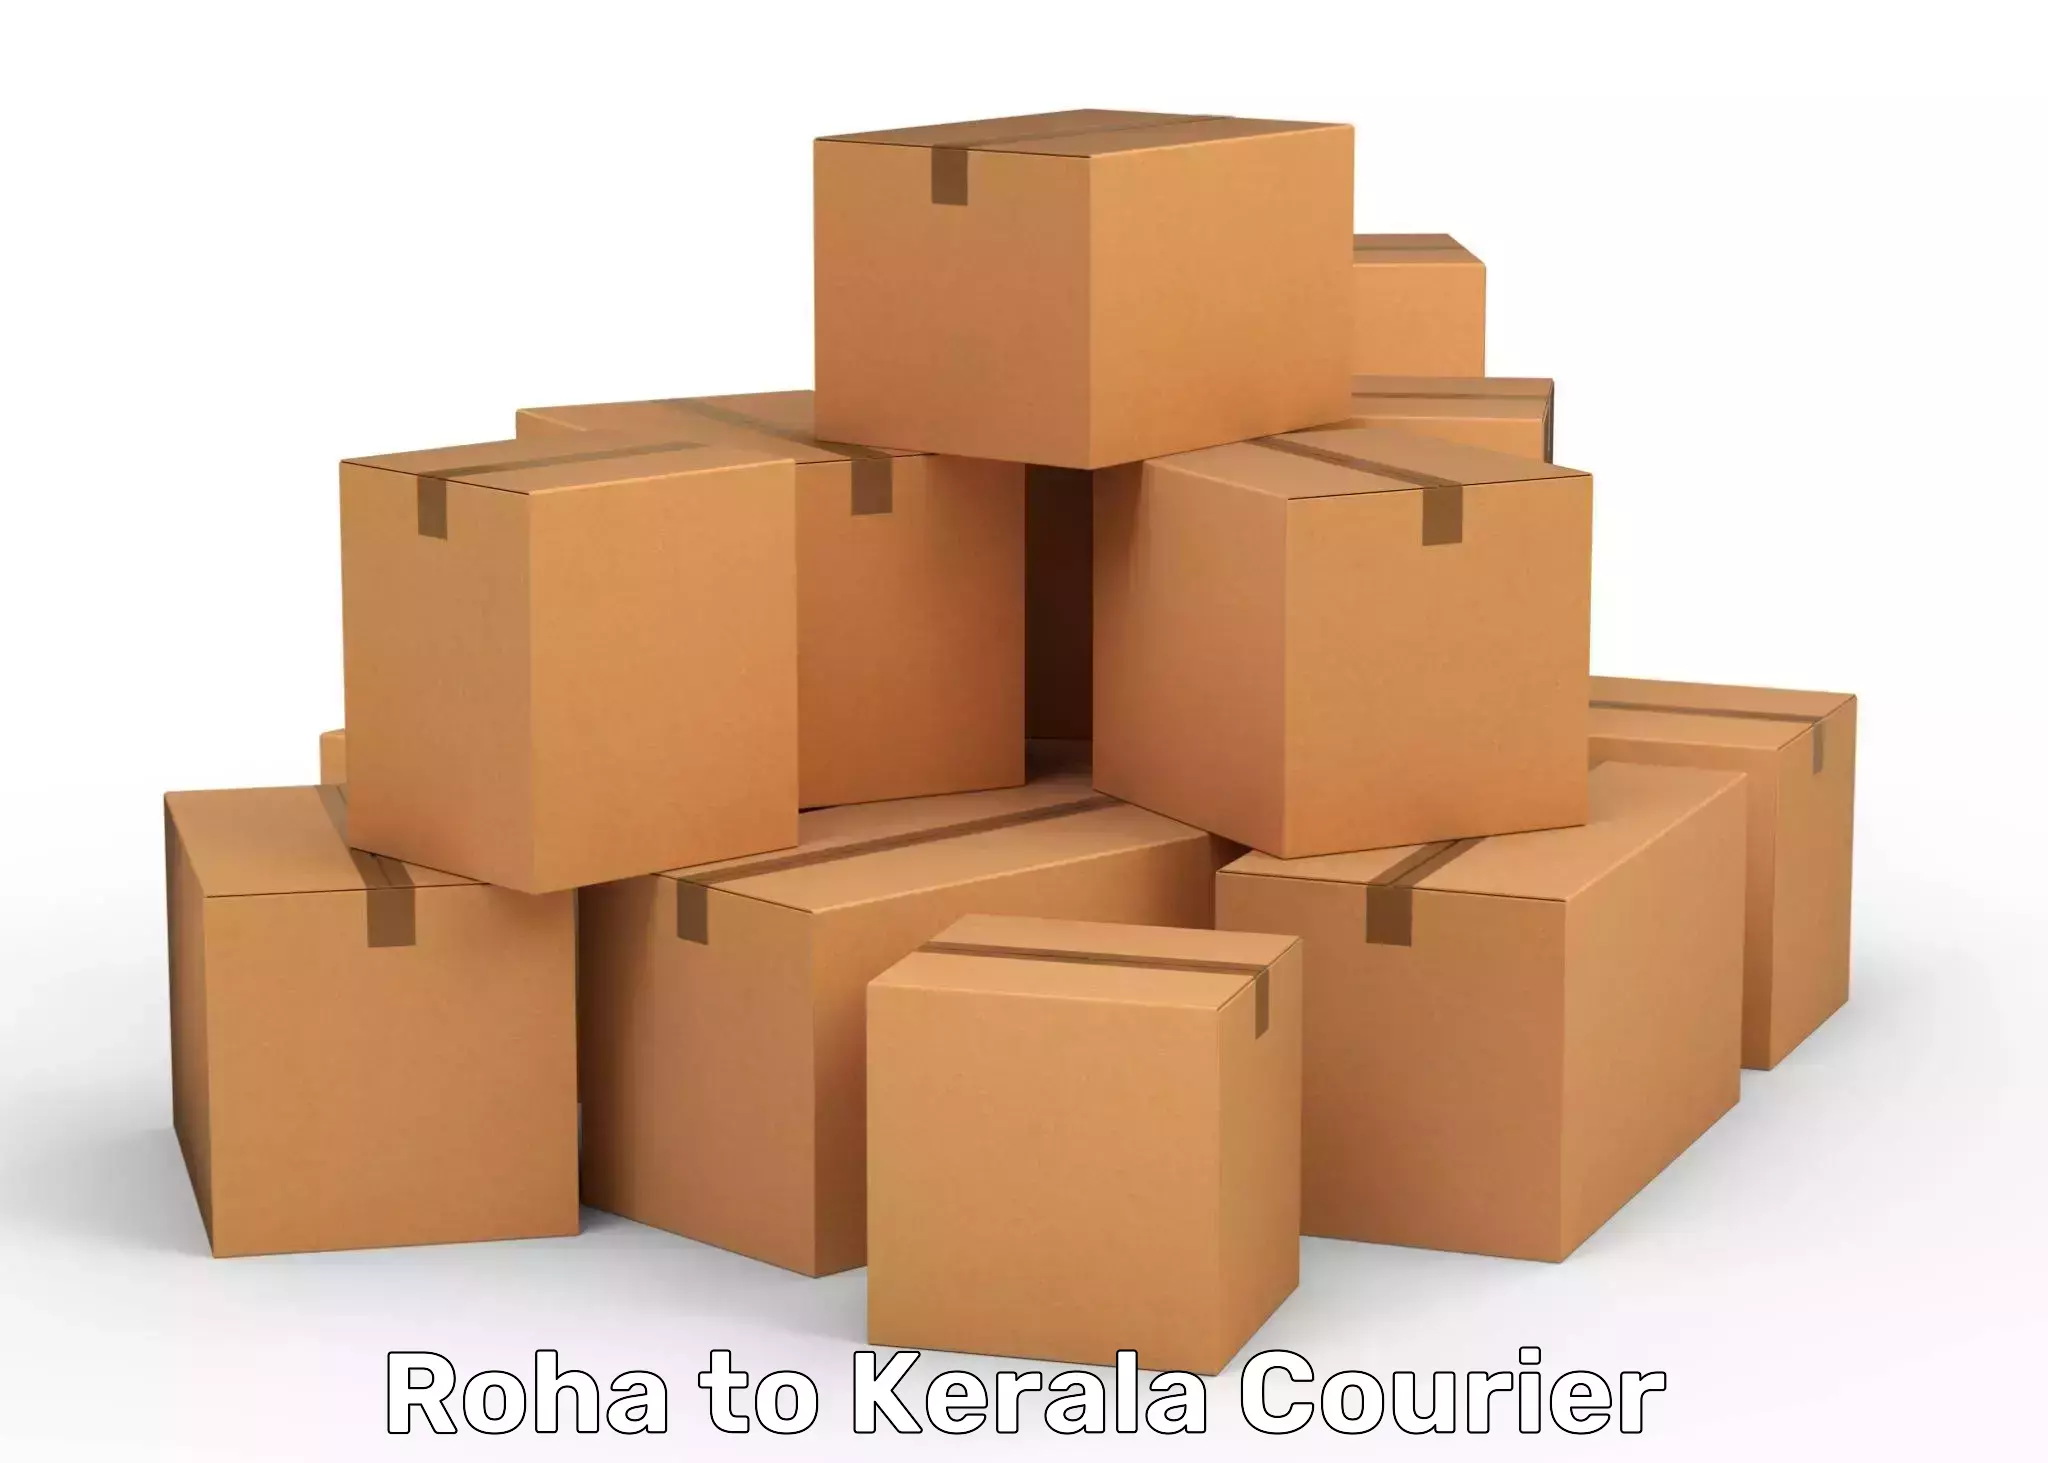 Package delivery network Roha to Kerala